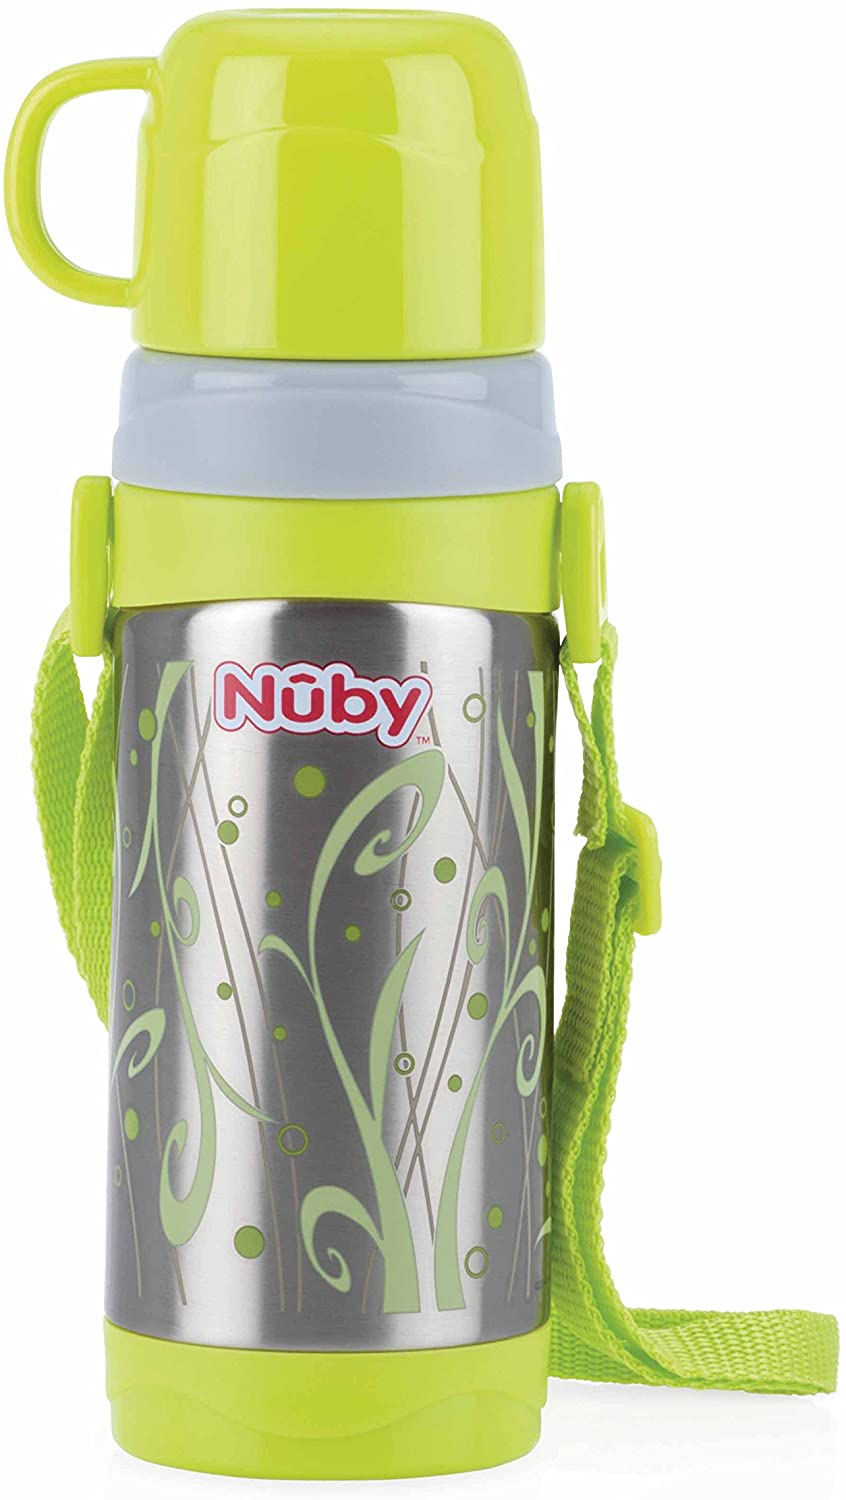 Nuby Insulated Stainless Steel Thermos Flask 4 Years RRP 19.99 CLEARANCE XL 12.99